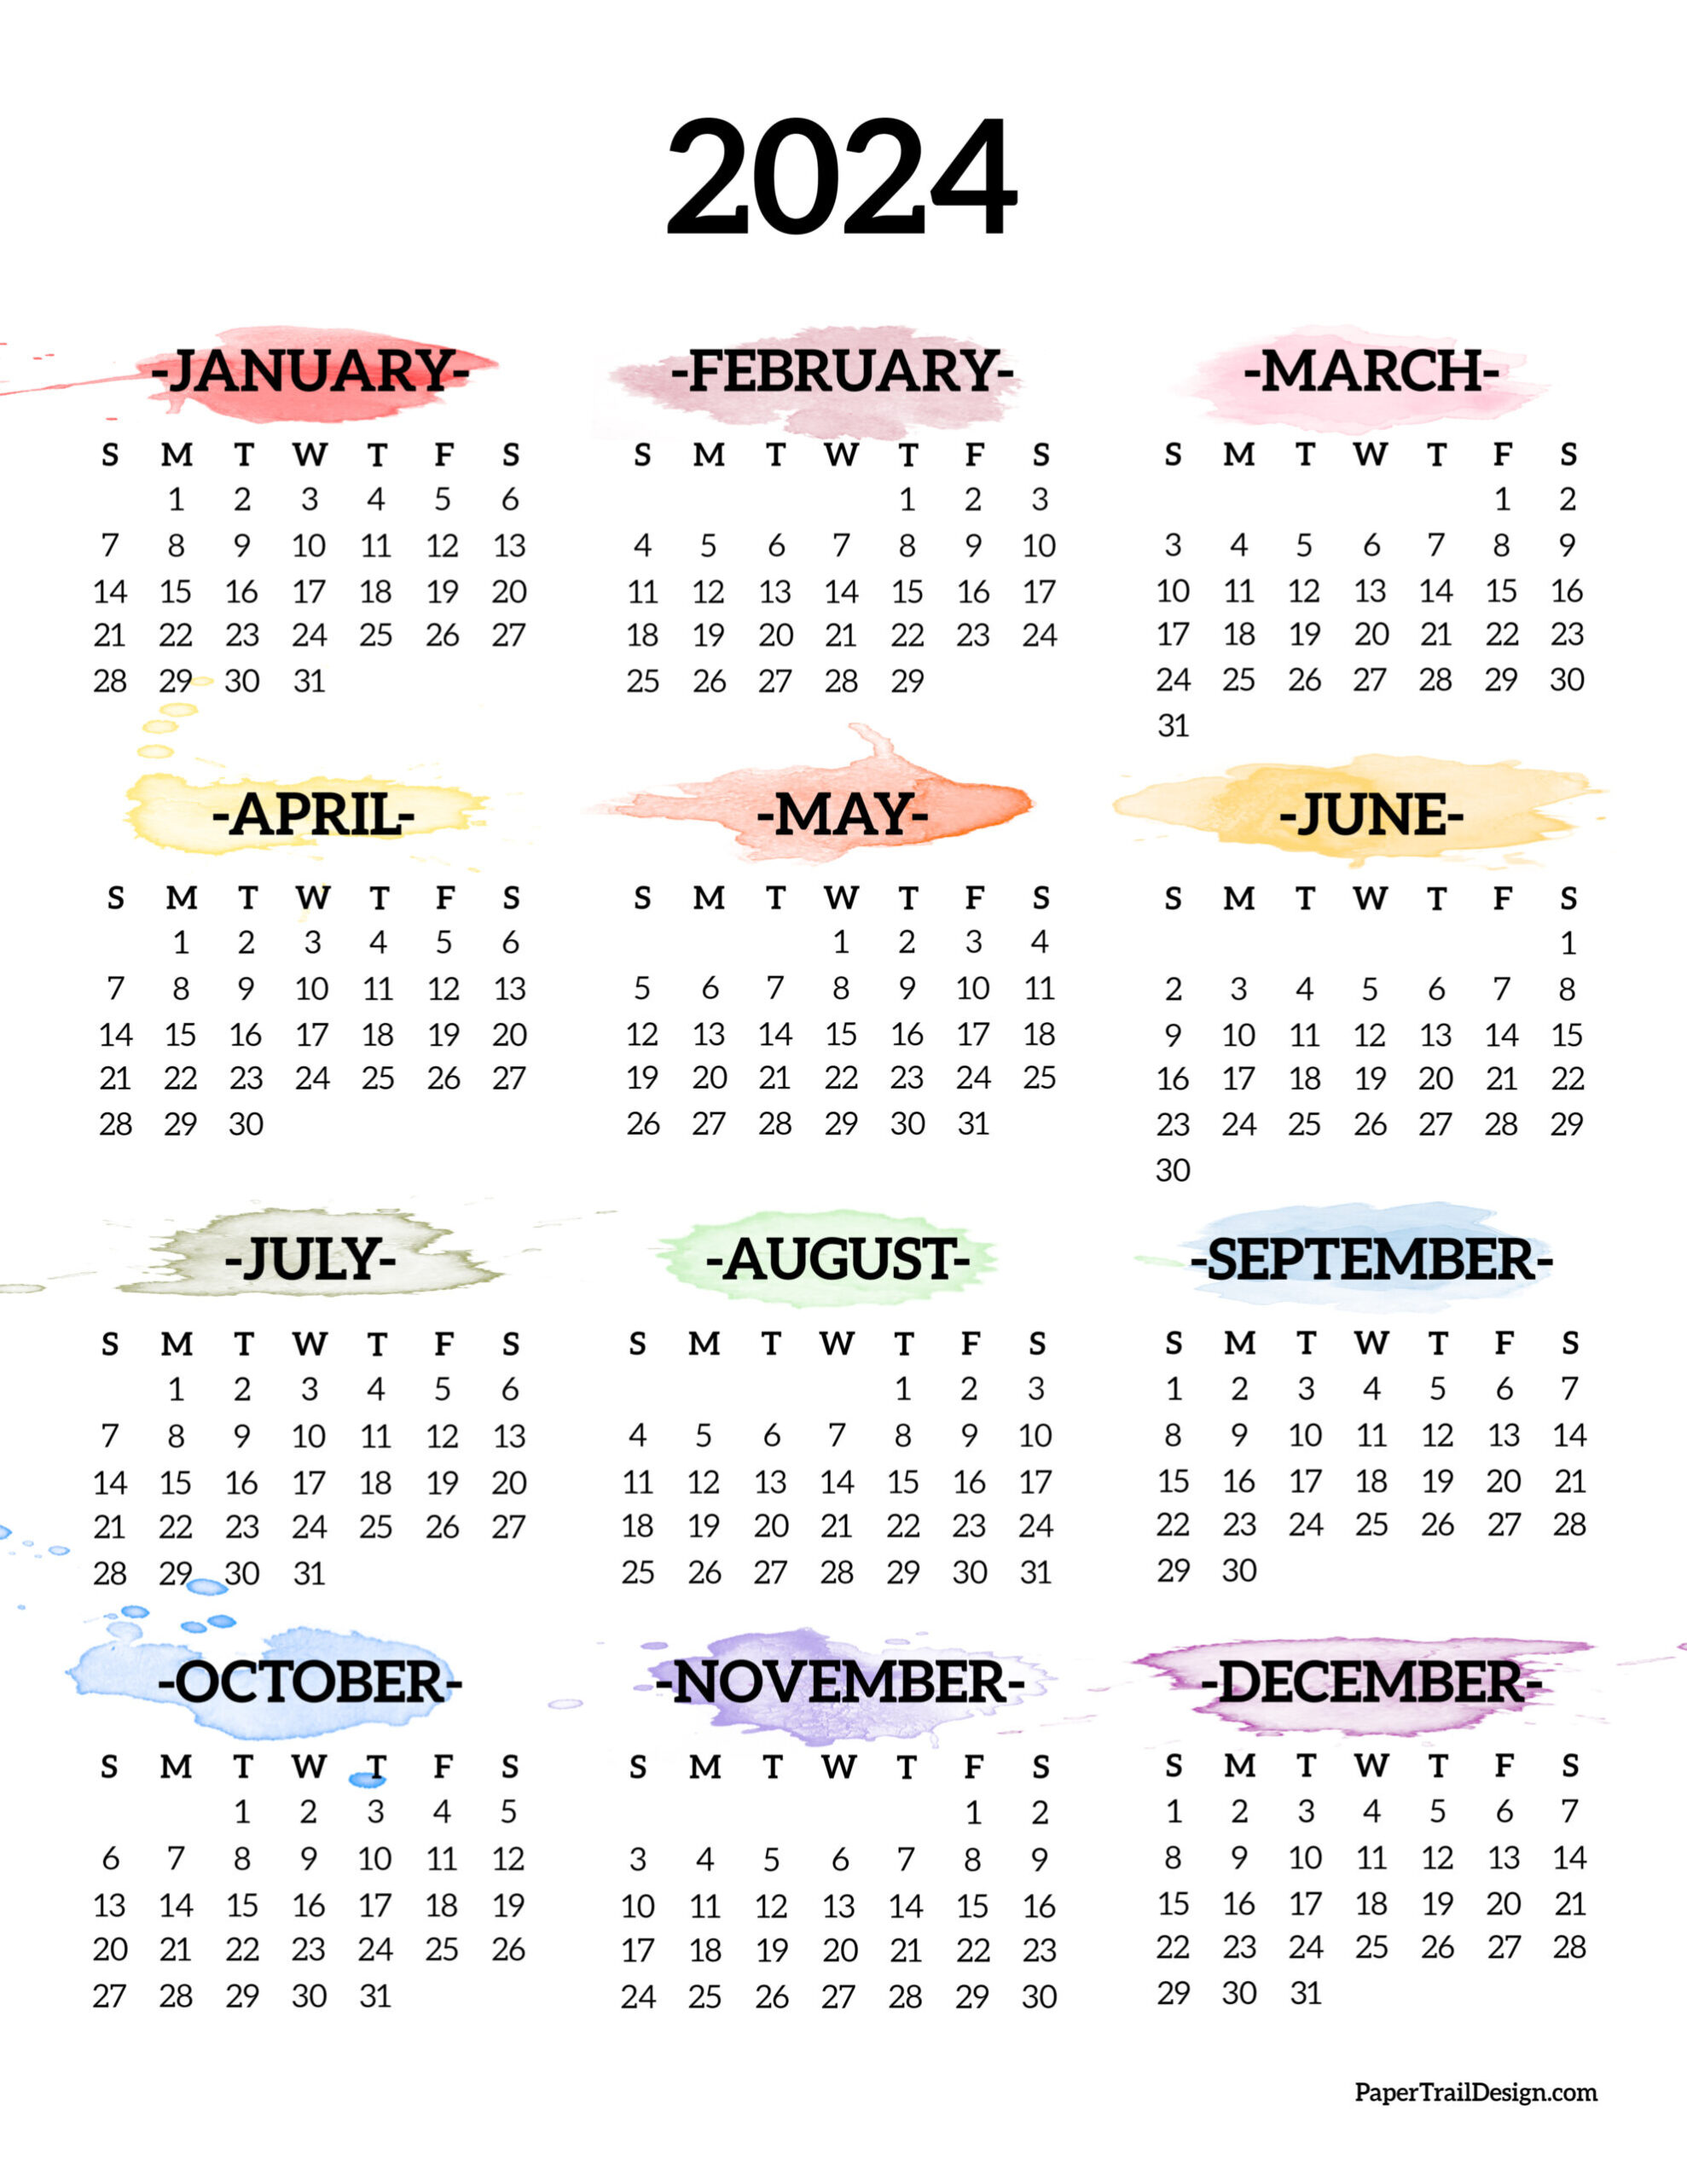 Calendar 2024 Printable One Page - Paper Trail Design | Yearly Calendar 2024